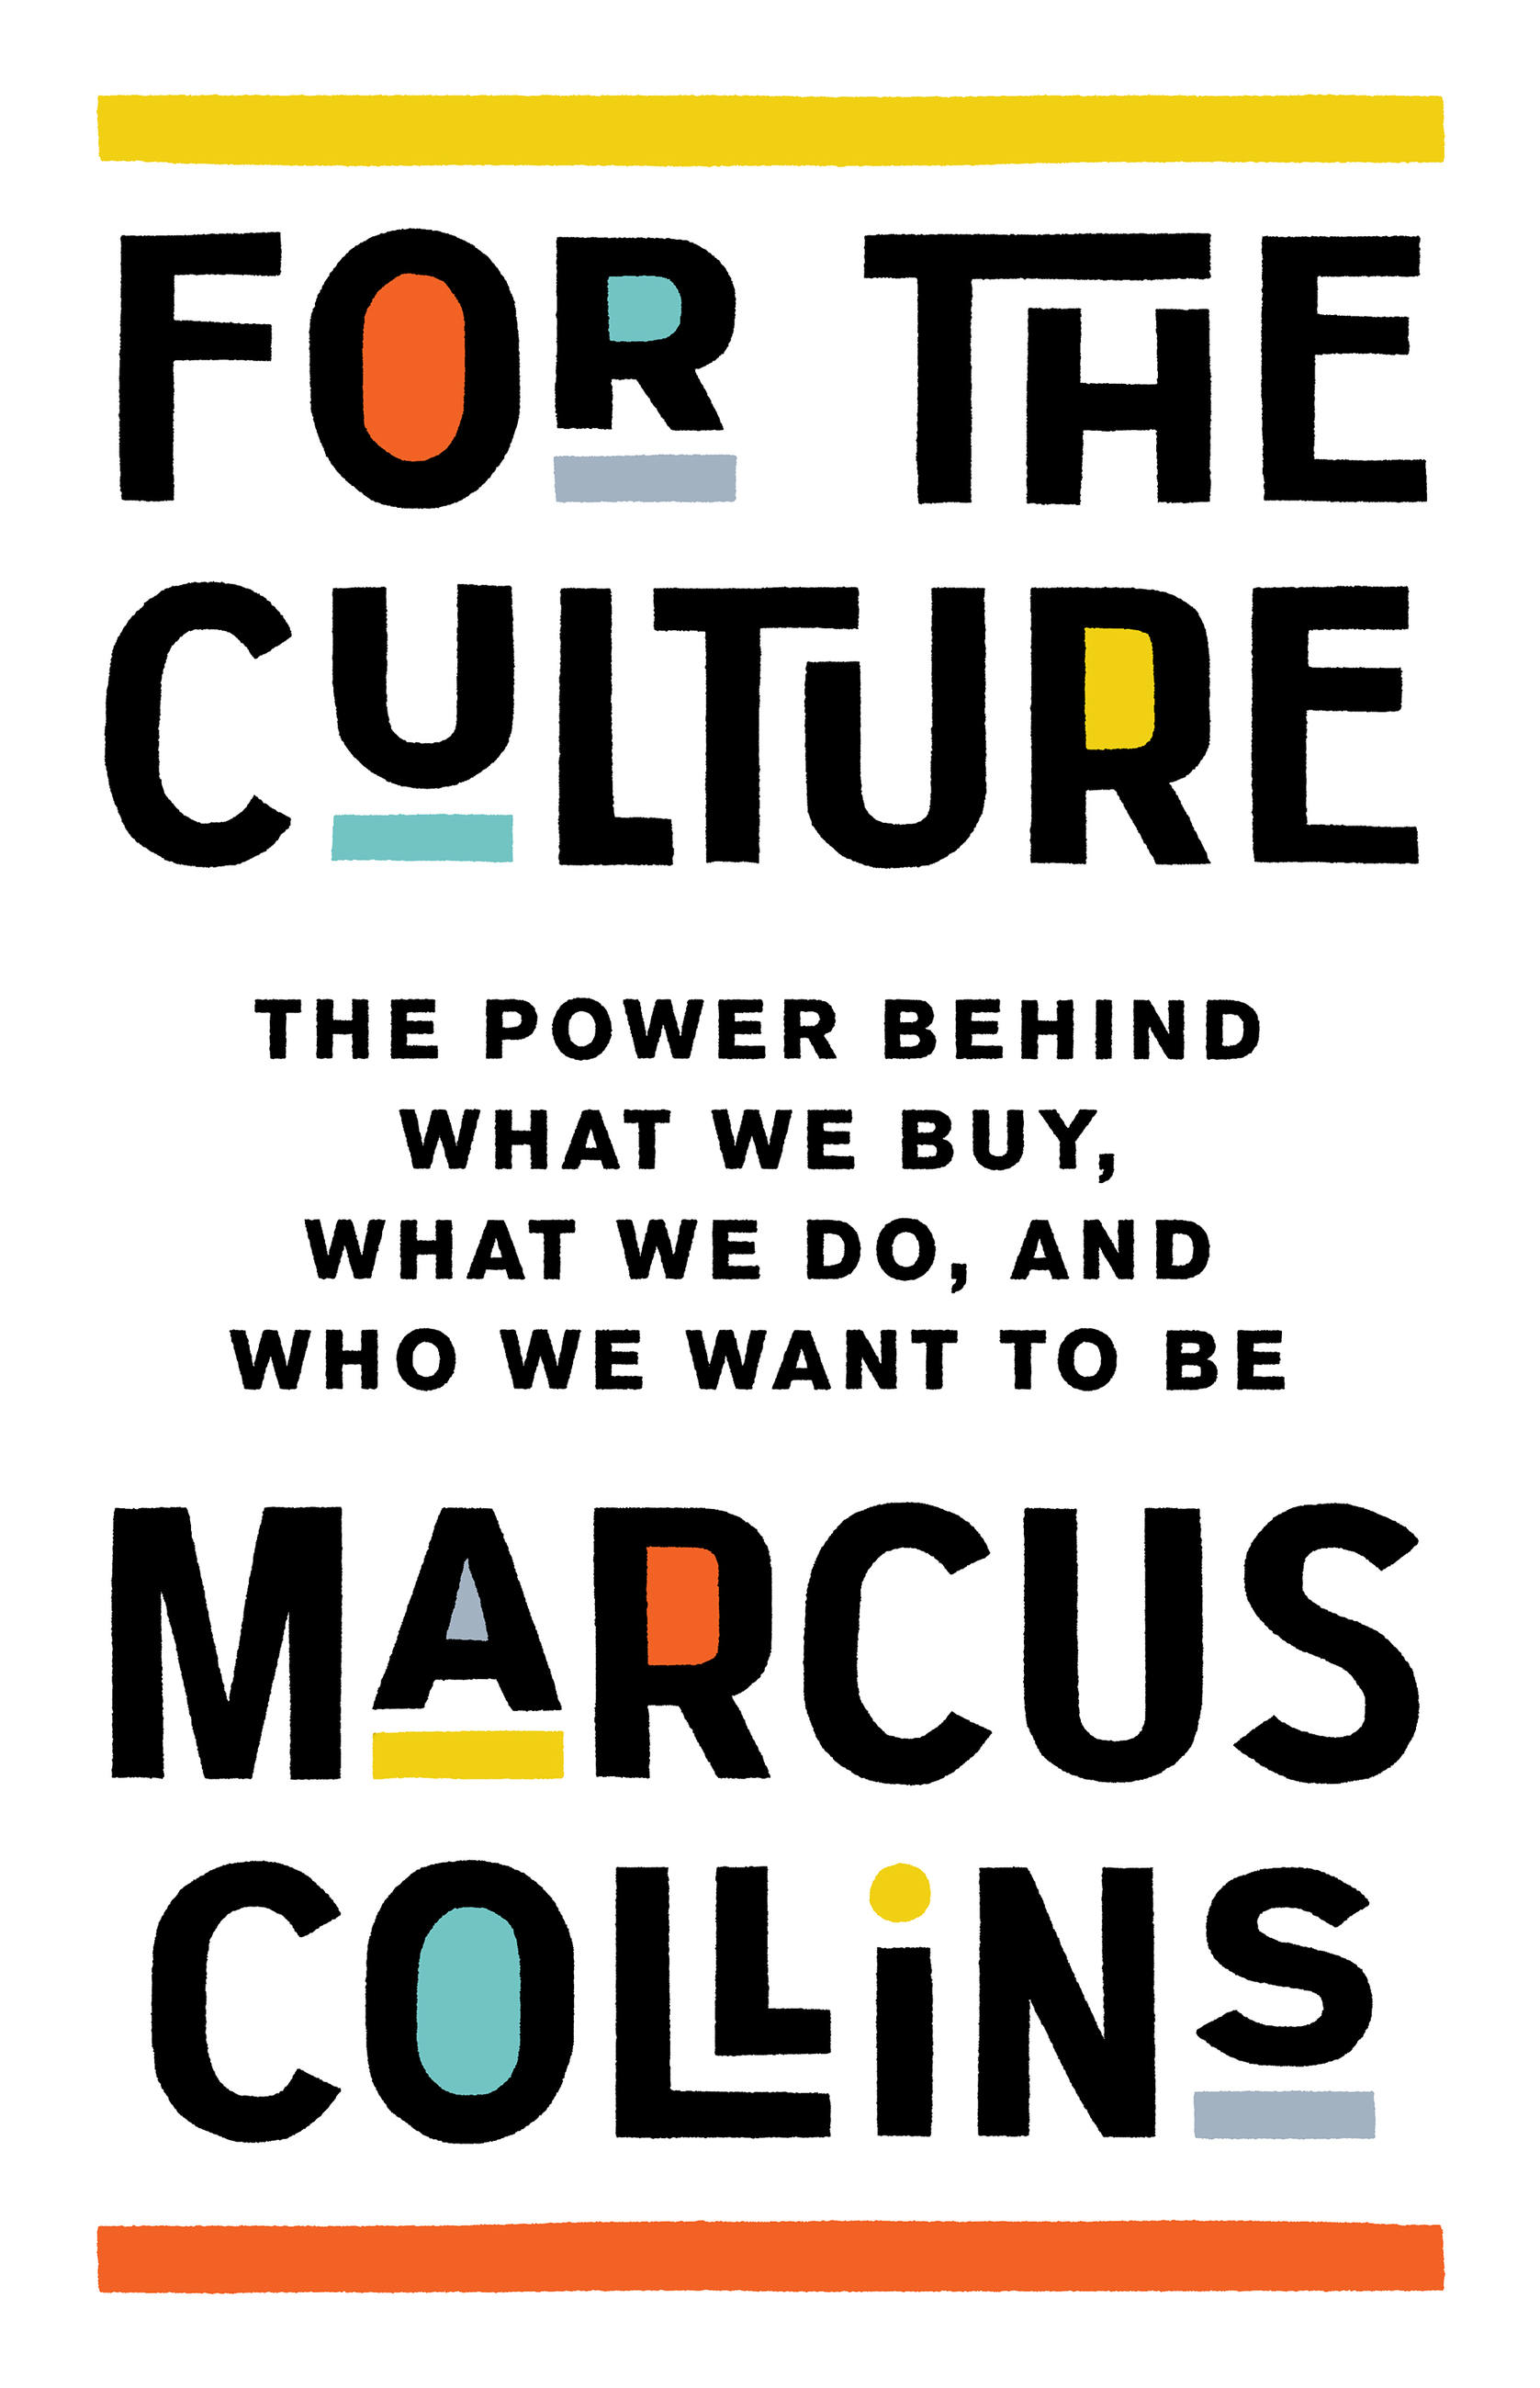 Book　For　Marcus　Hachette　Culture　the　Collins　by　Group